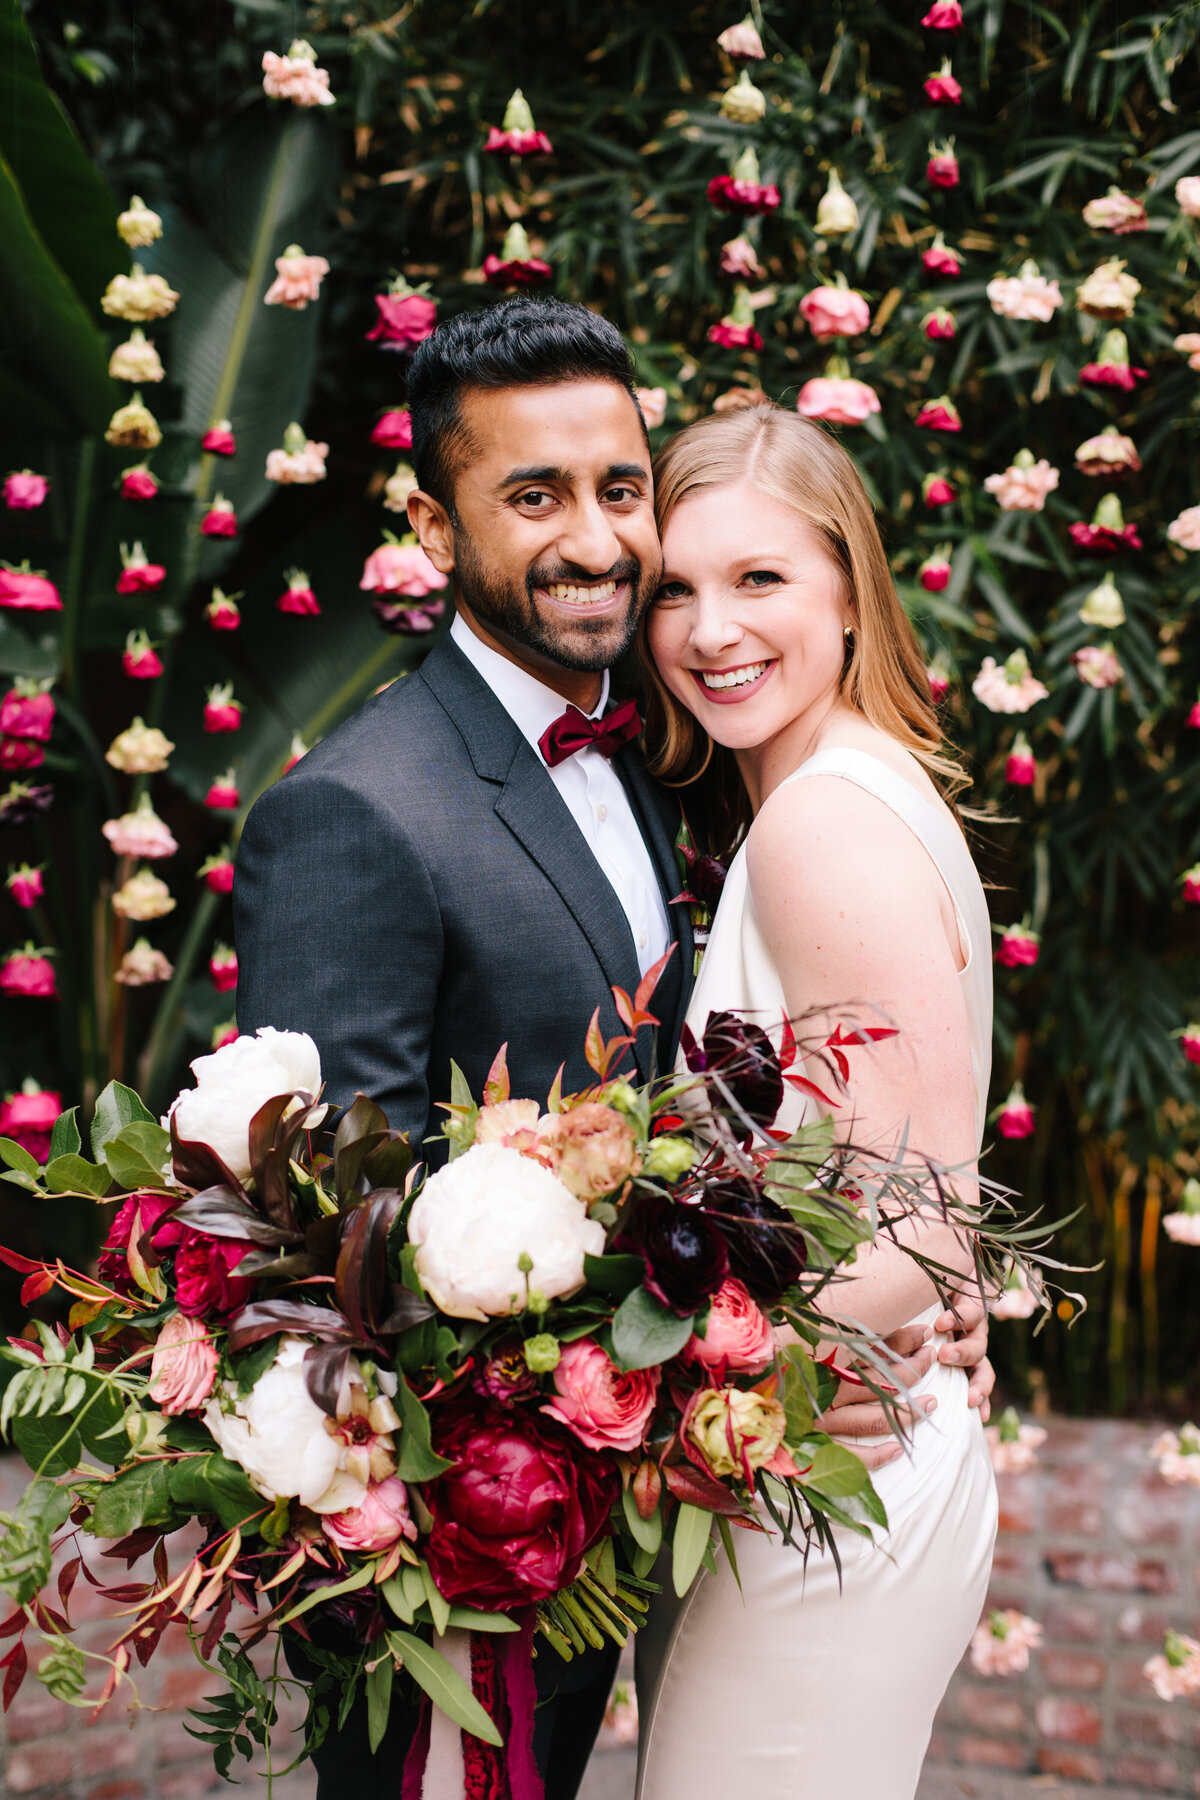 Sri-Lankan groom embraces his bride while they stand in front of a floral garland ceremony structure. Bride is holding a large burgundy bridal bouquet.